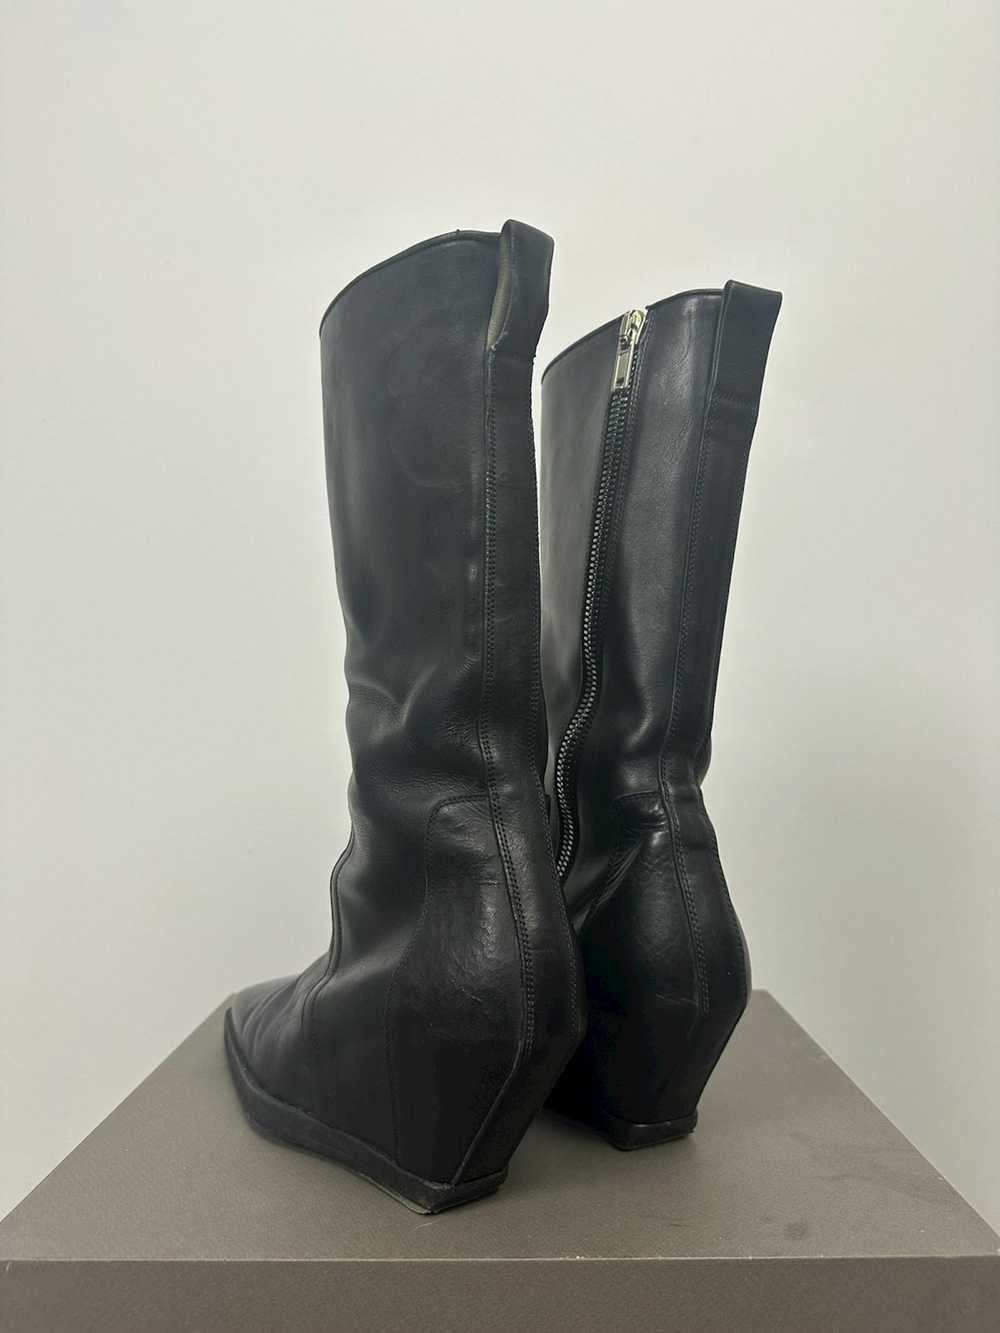 Rick Owens SS19 ‘BABEL’ Square Toe Wedge Boots - image 3